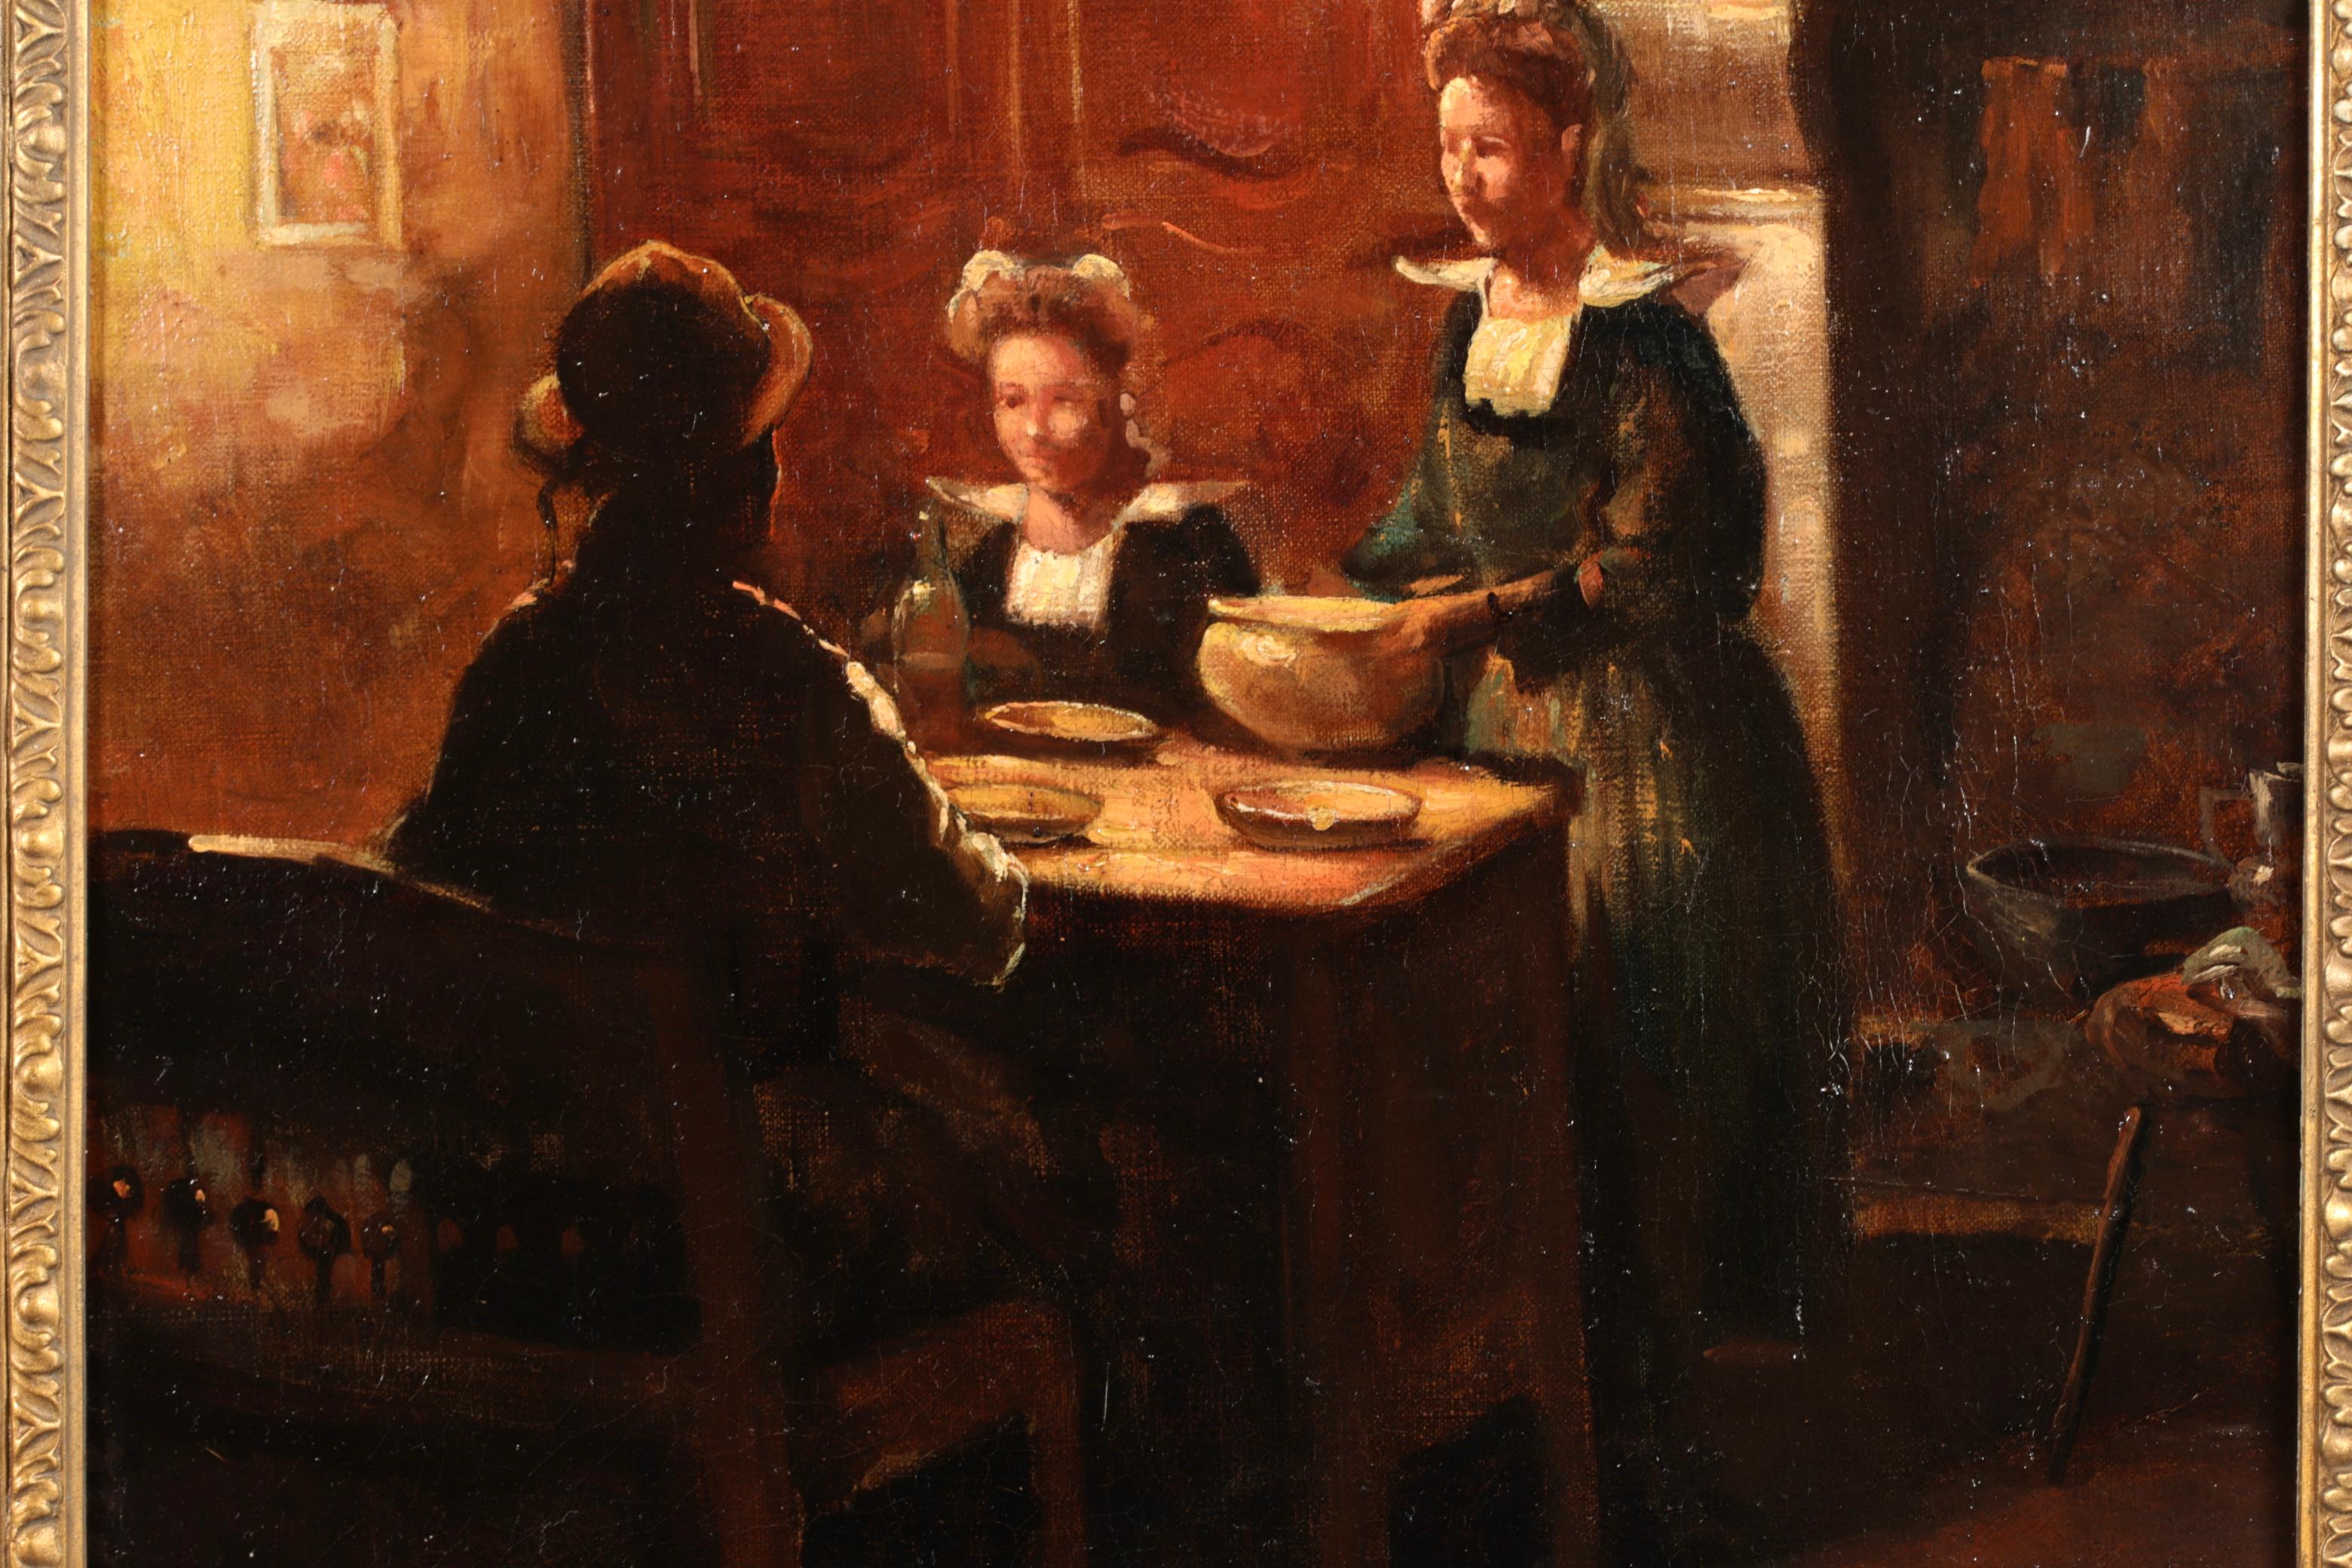 Signed figures in interior oil on canvas circa 1910 by sought after French impressionist painter Edouard Leon Cortes. This charming and nostalgic work depicts a family enjoying dinner in a typical Breton kitchen scene. A man and lady are seated at